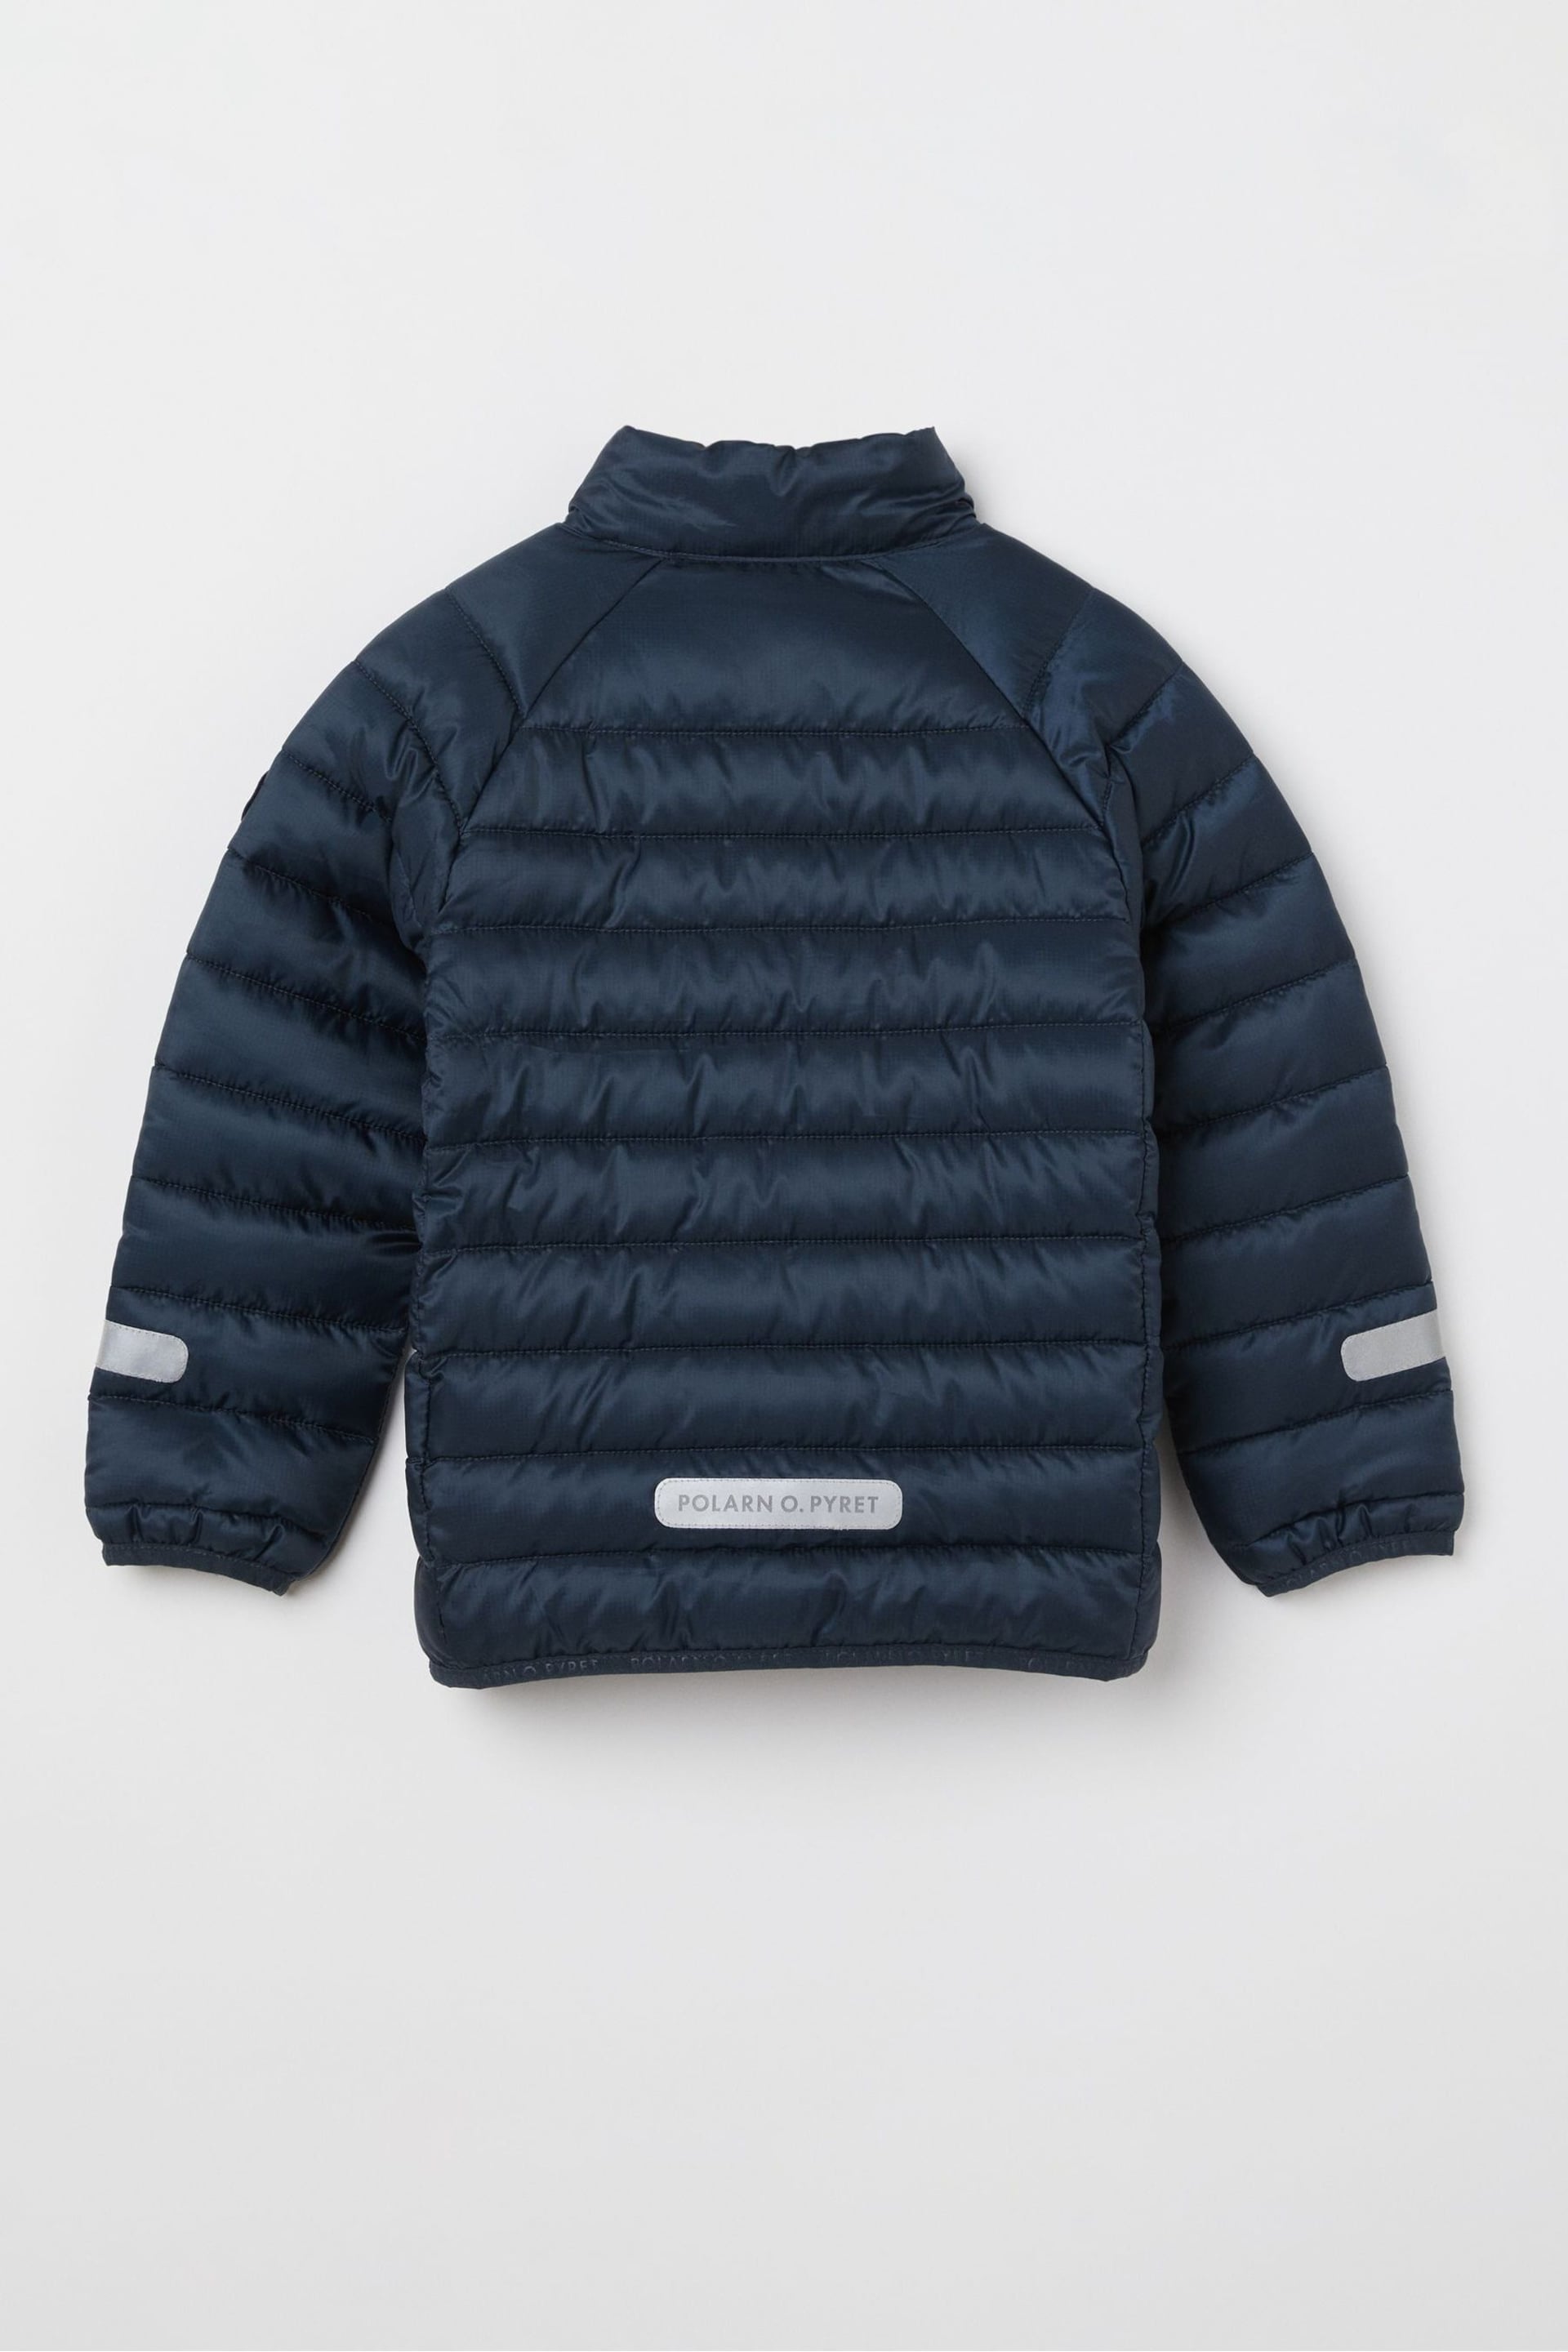 Polarn O Pyret Blue Quilted Water Resistant Jacket - Image 4 of 4